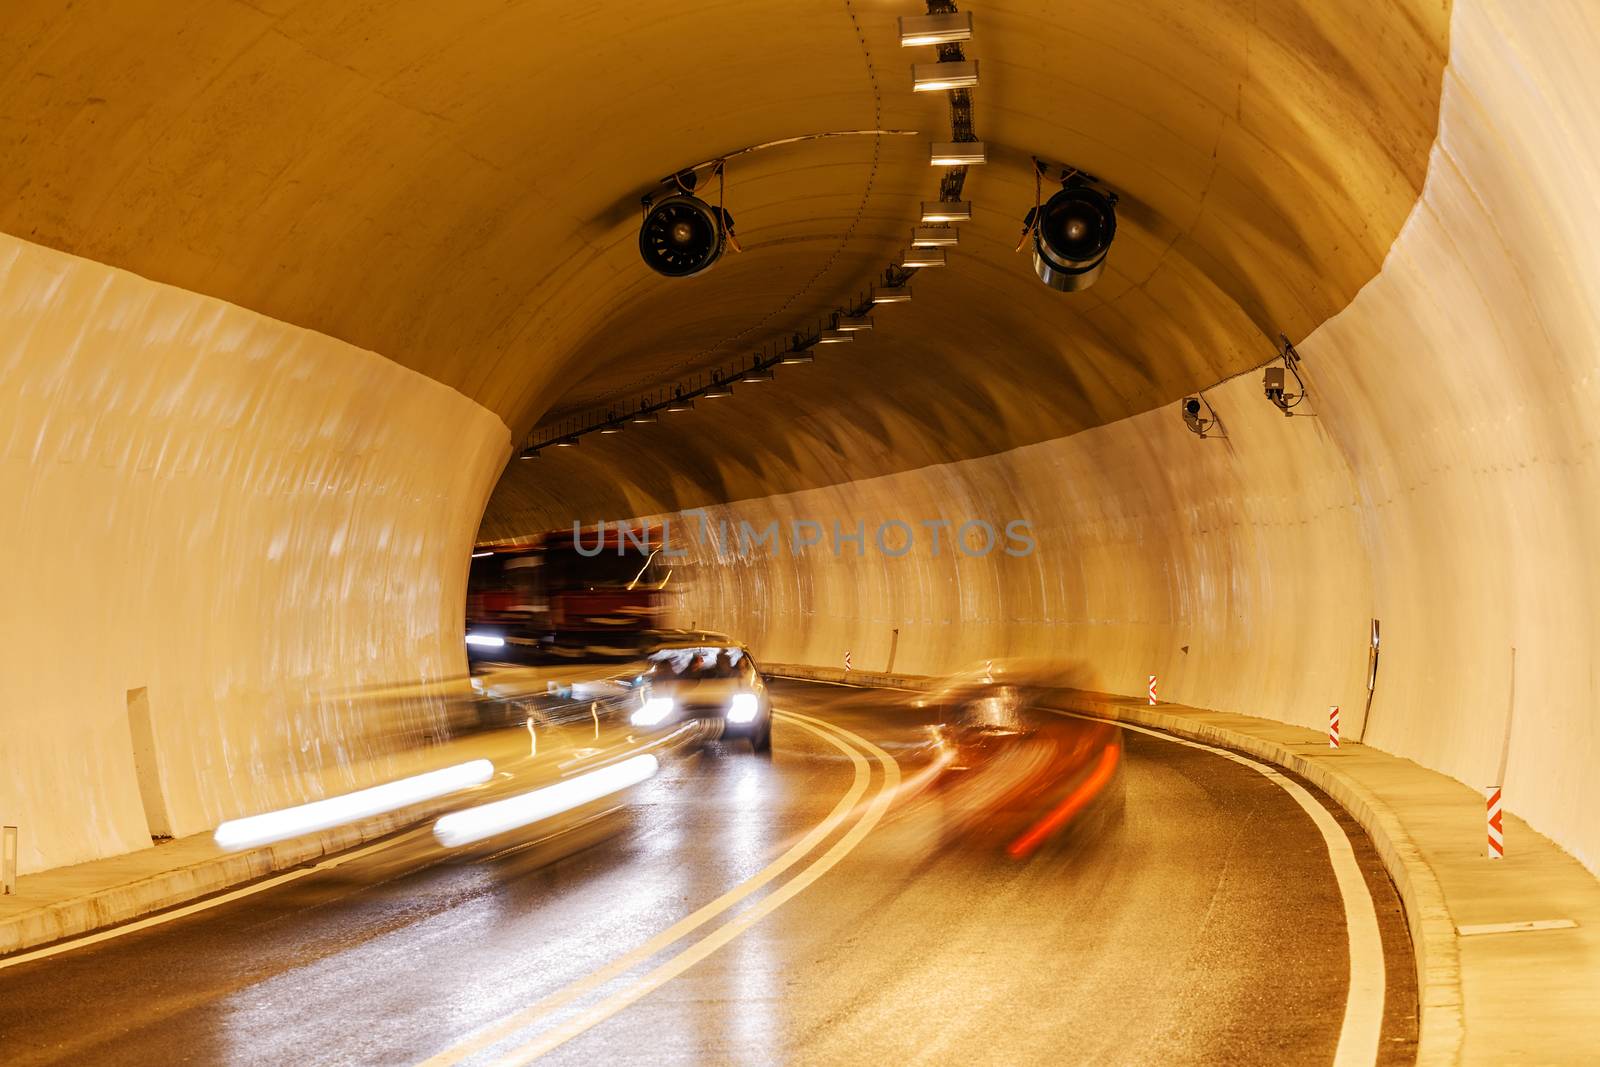 Tunnel with lights and moving cars